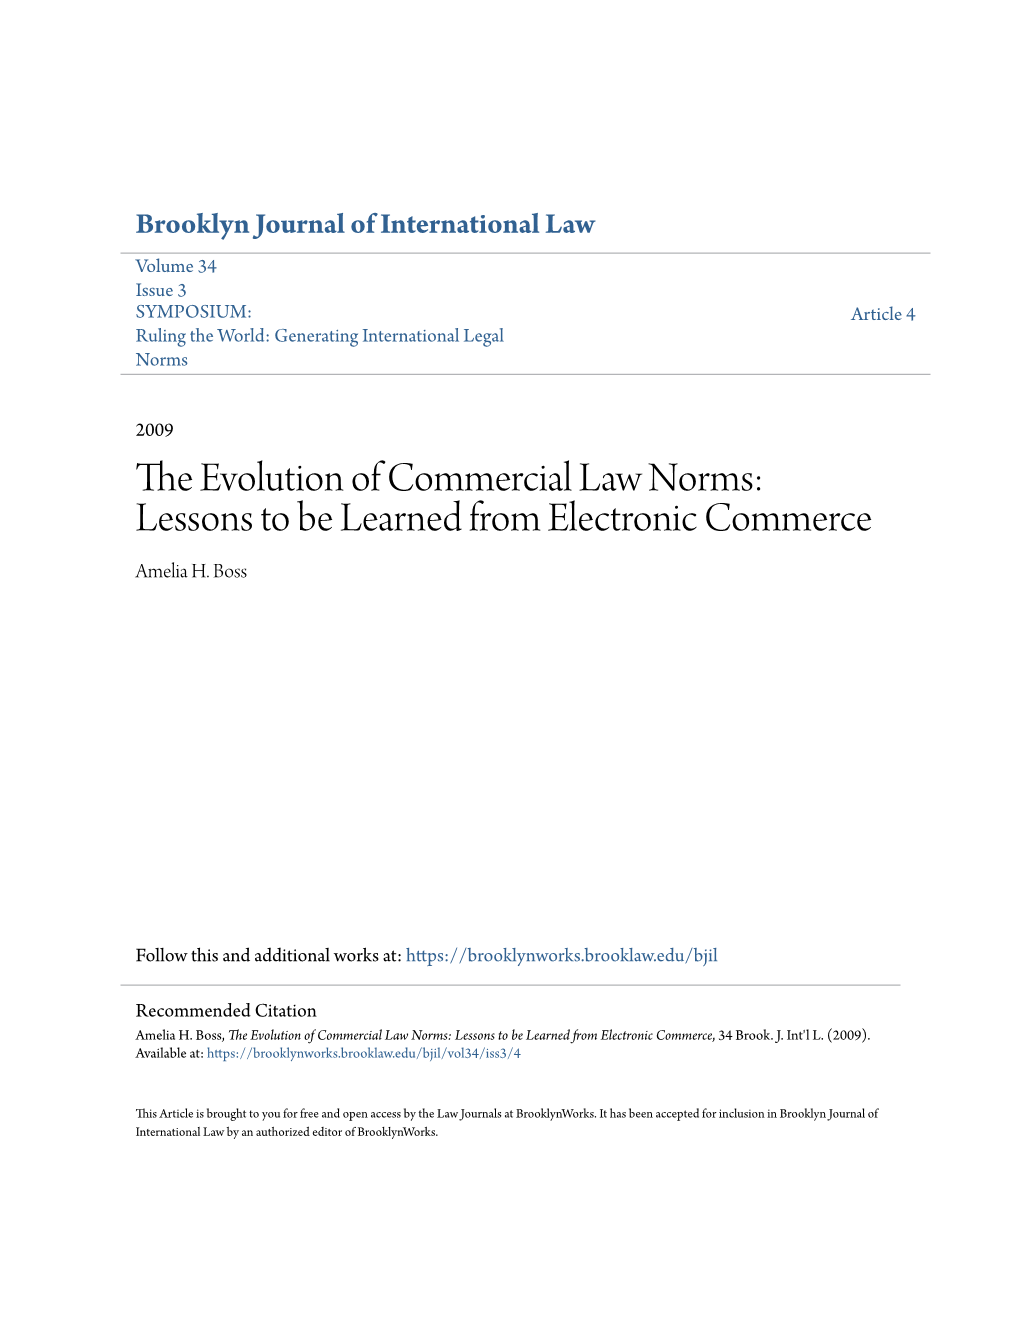 The Evolution of Commercial Law Norms: Lessons to Be Learned from Electronic Commerce, 34 Brook